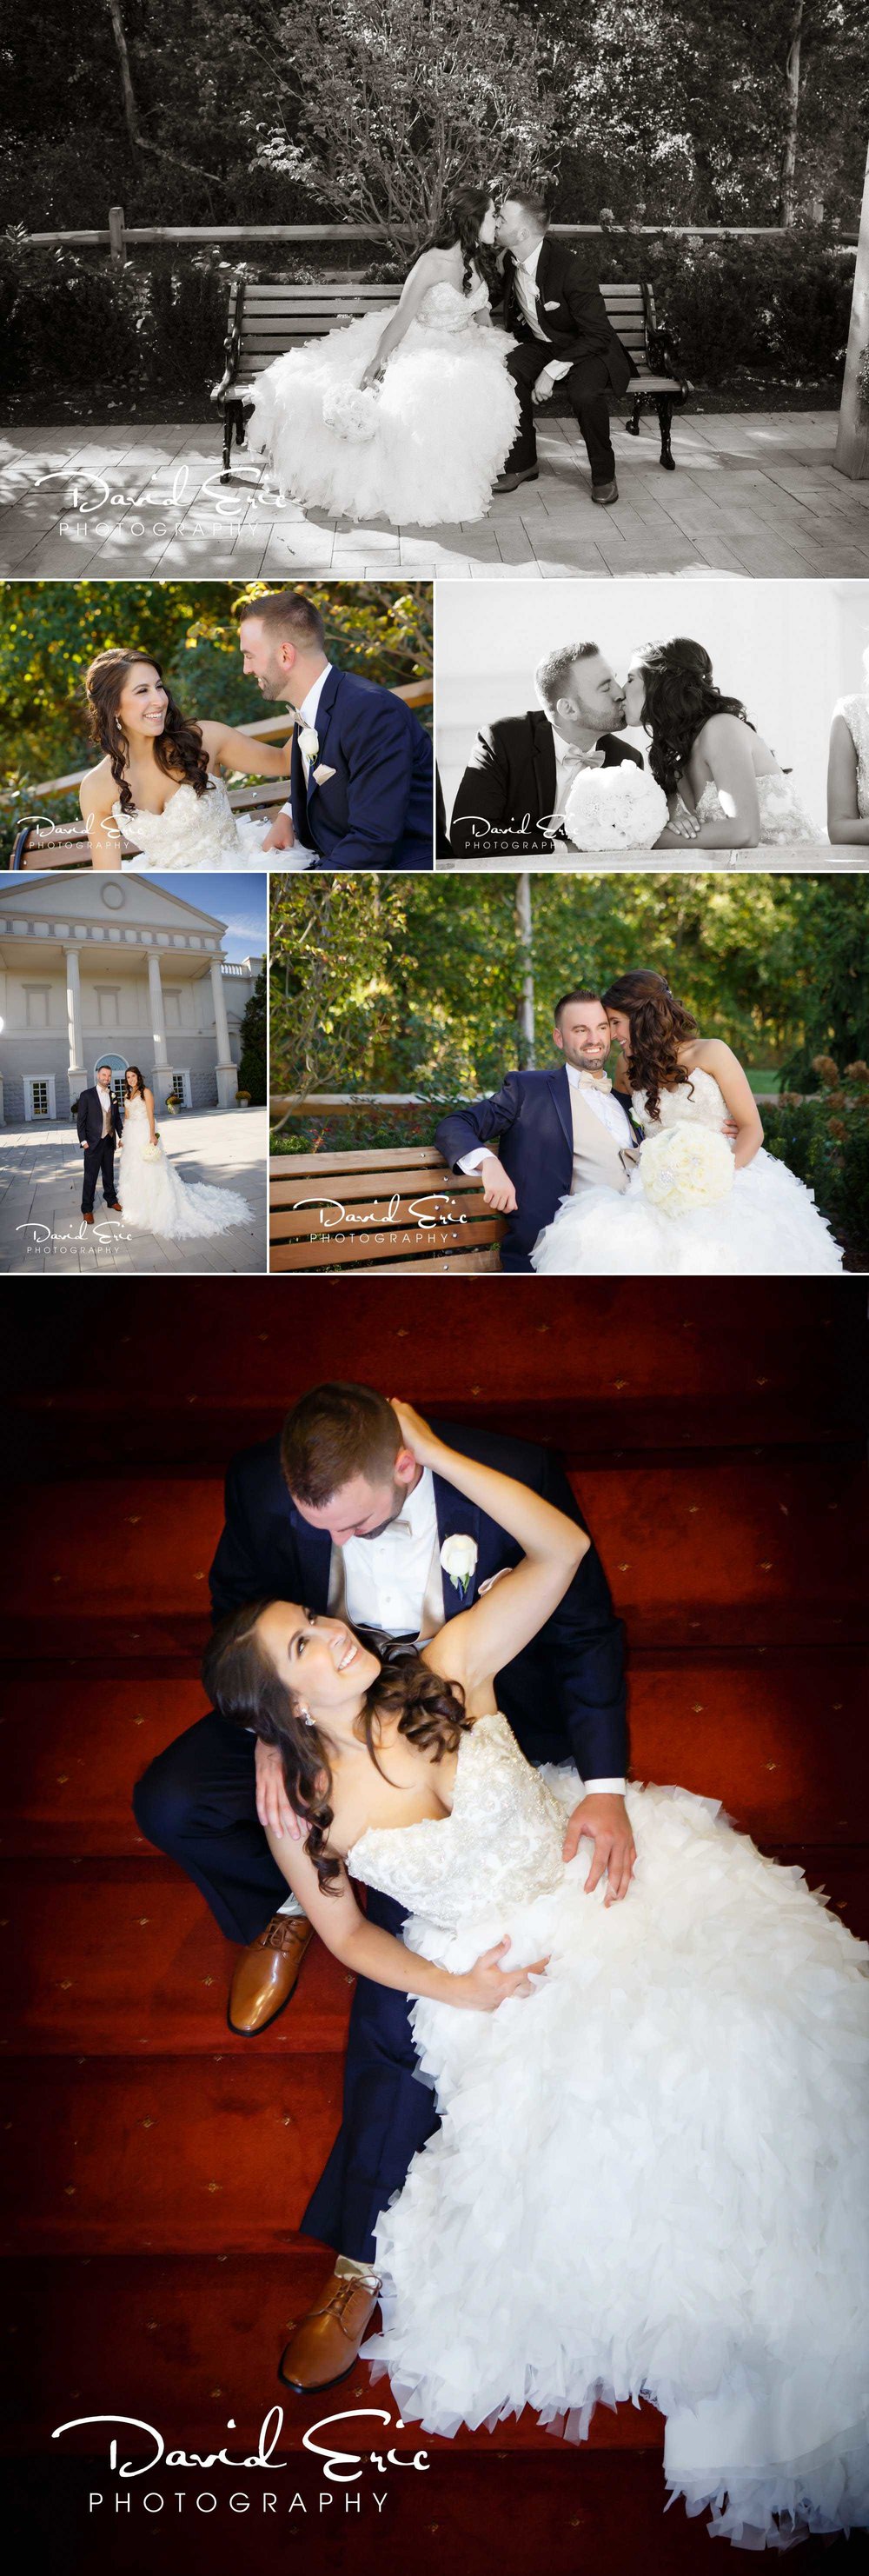  We are listed on The Knot Wedding Photographer page as well as on Wedding Wire Photographer page 